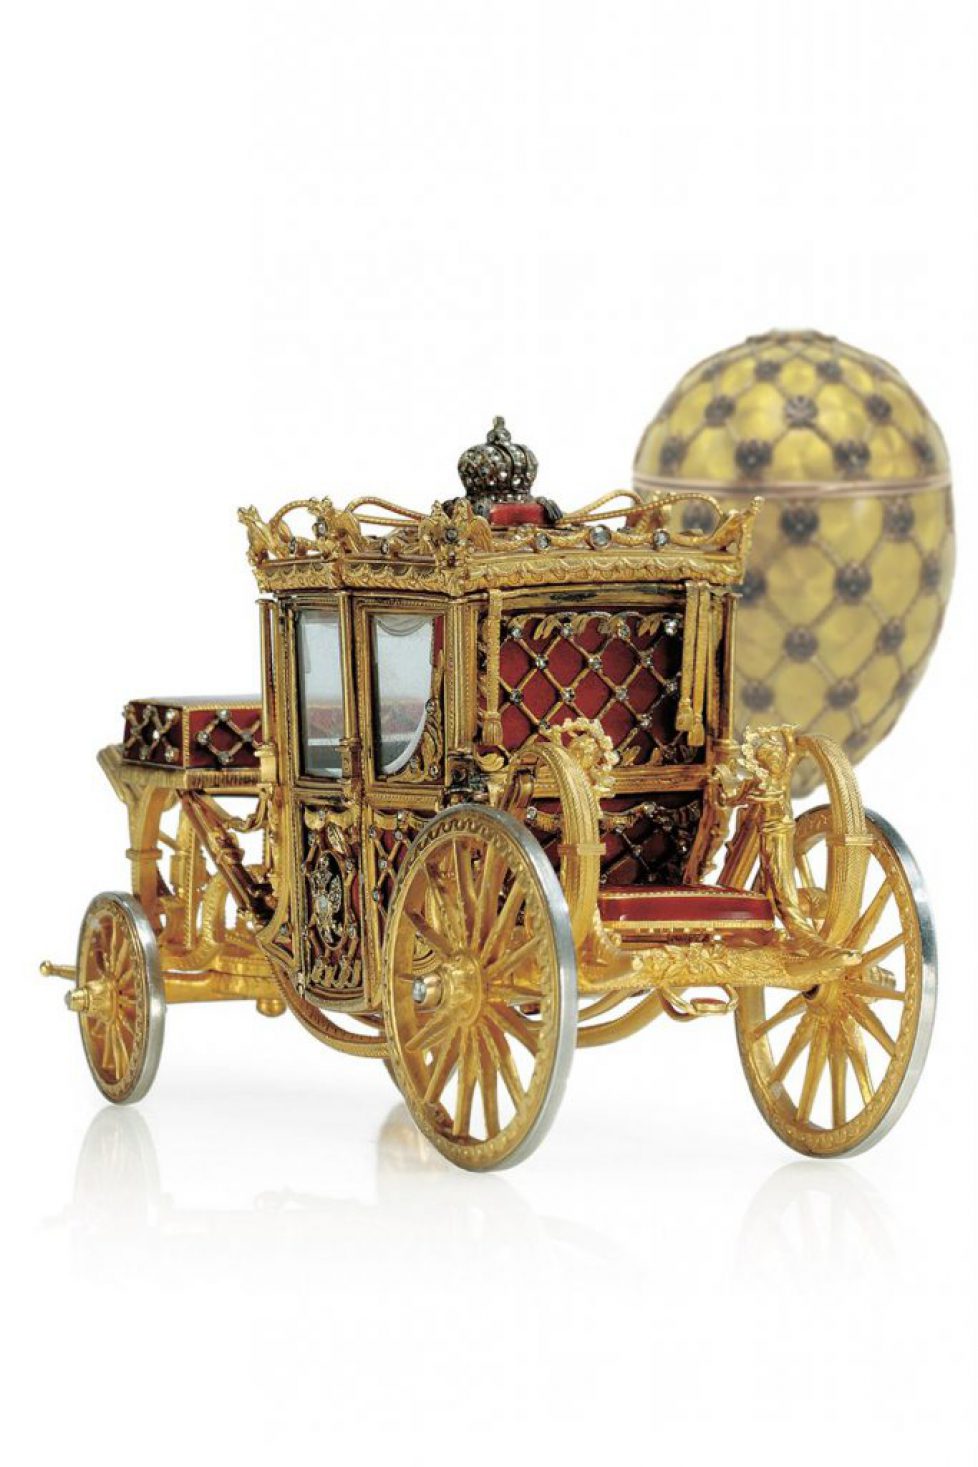 Imperial-Coronation-Easter-Egg-tatler-18jun15_Faberge-Museum-in-St-Petersbourg--The-Link-of-Times-Foundation_b